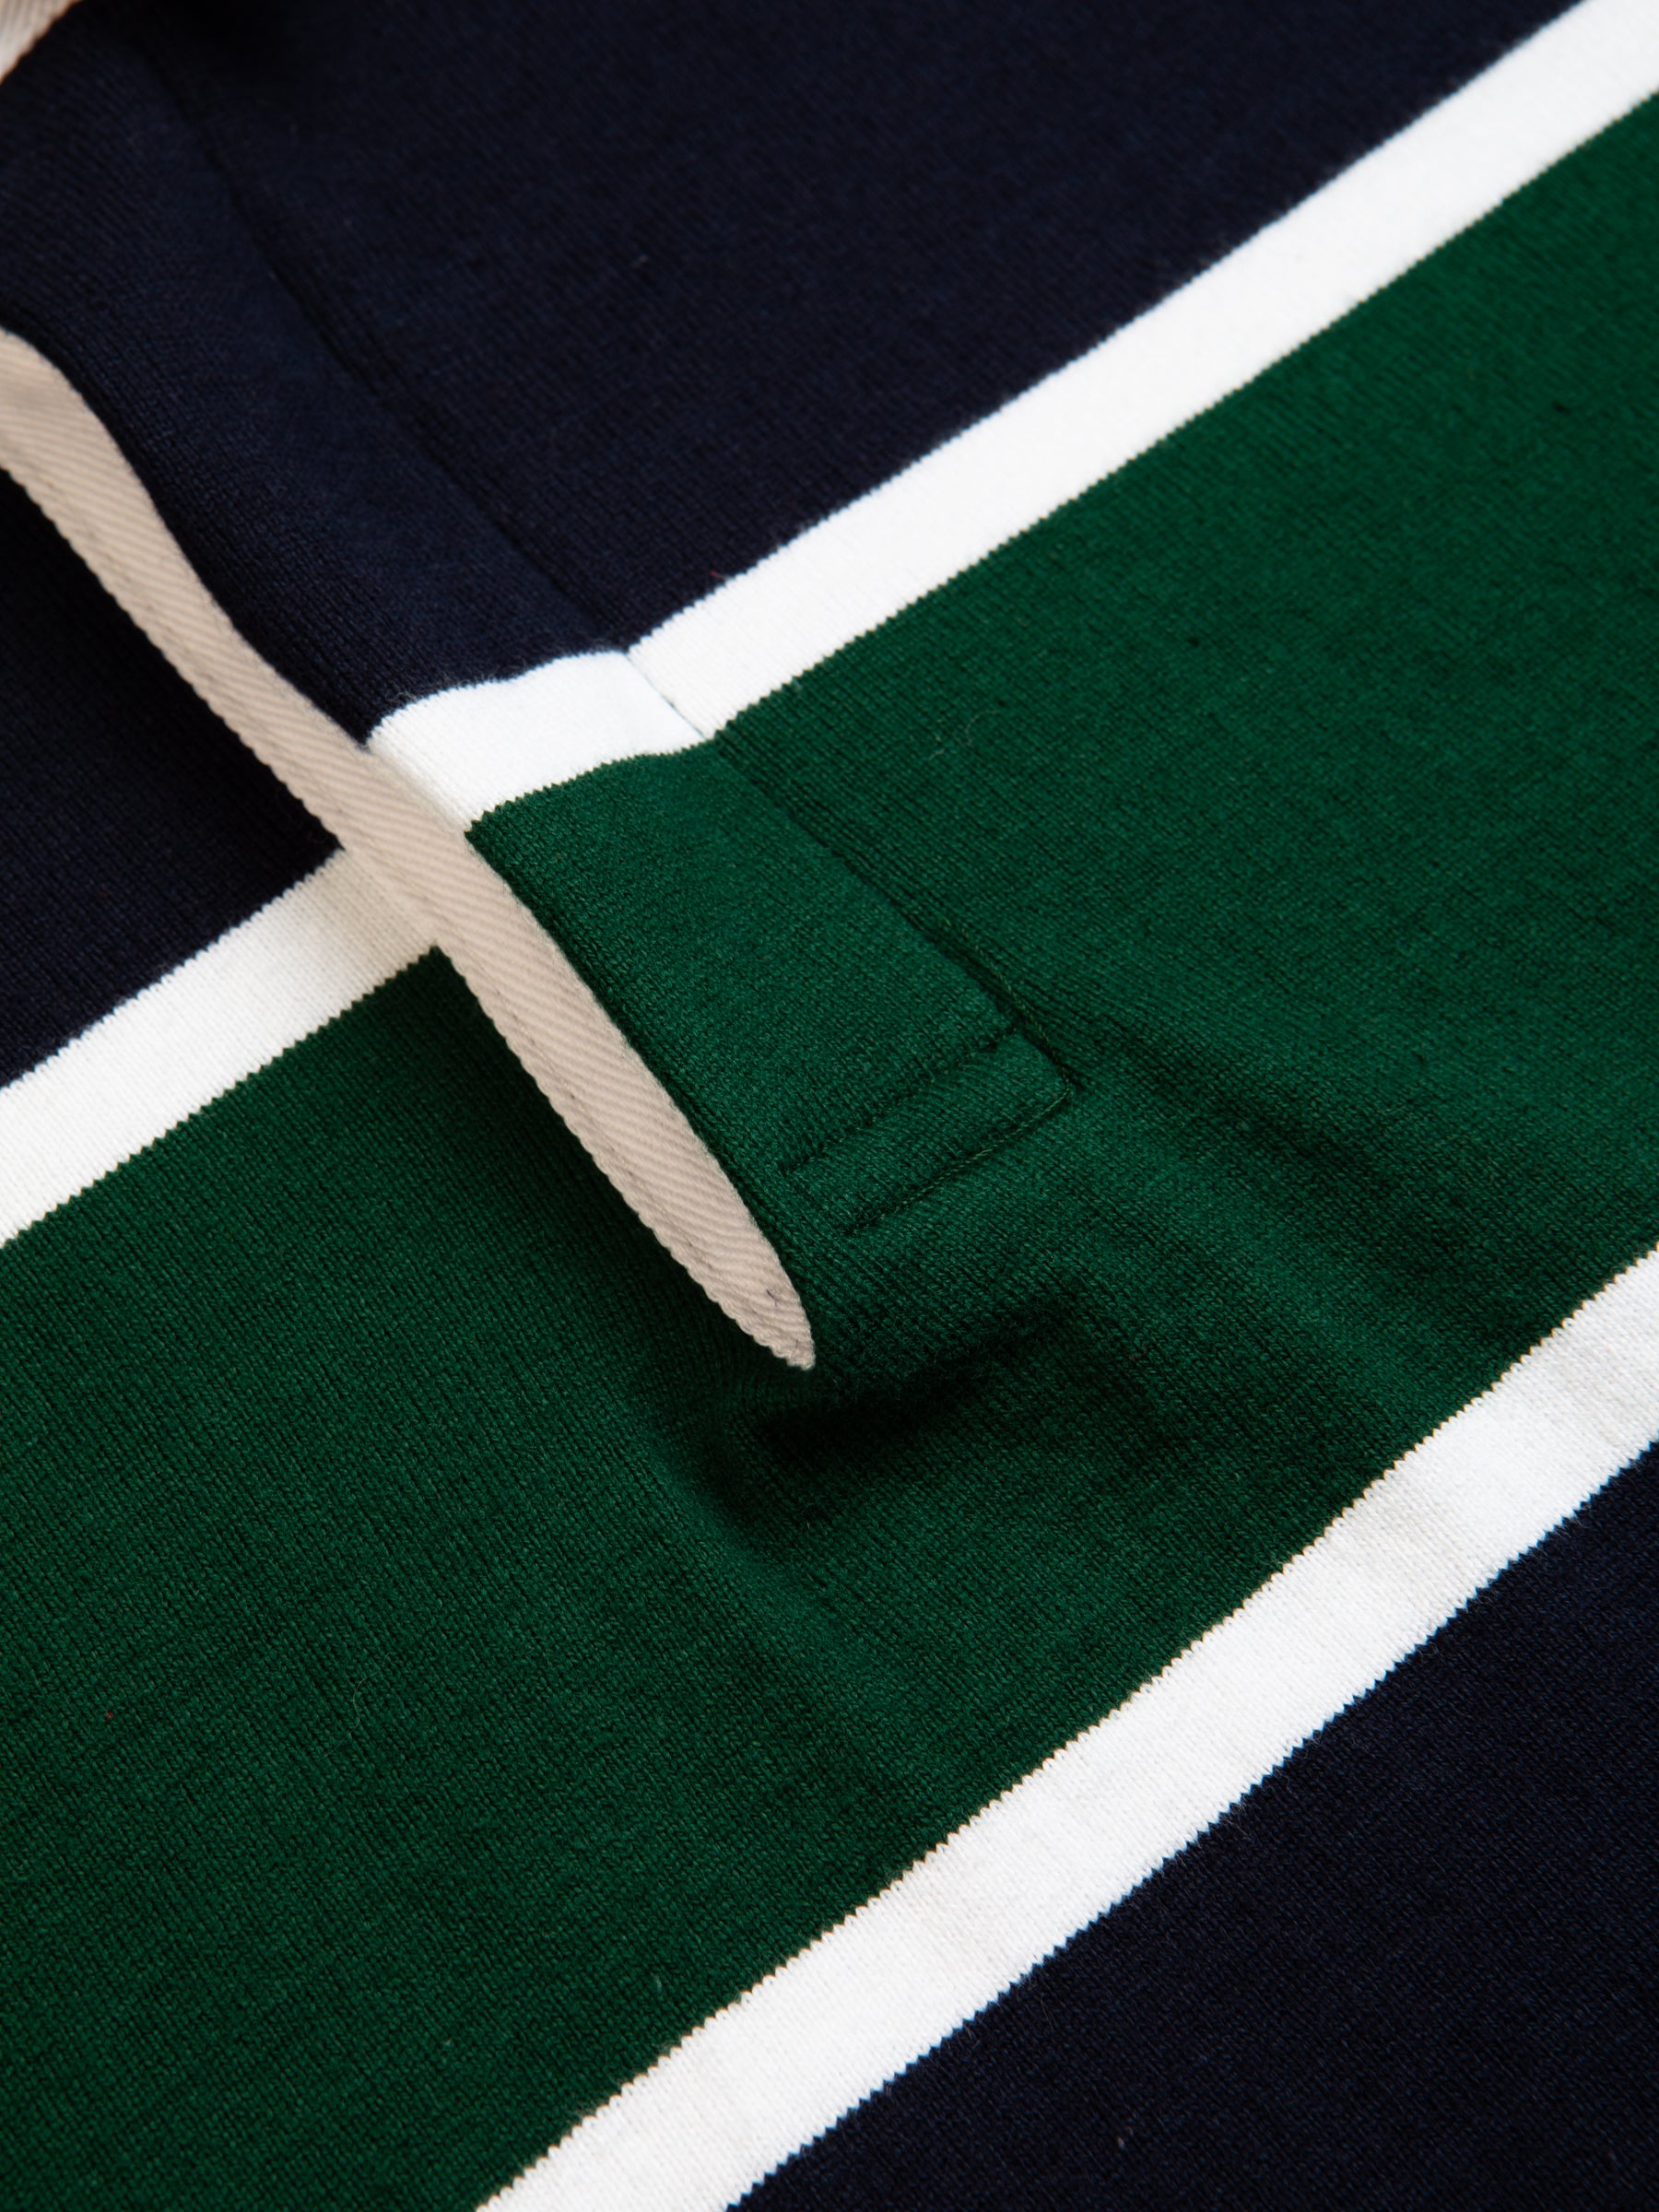 Selkirk Classic Rugby in Navy / Green